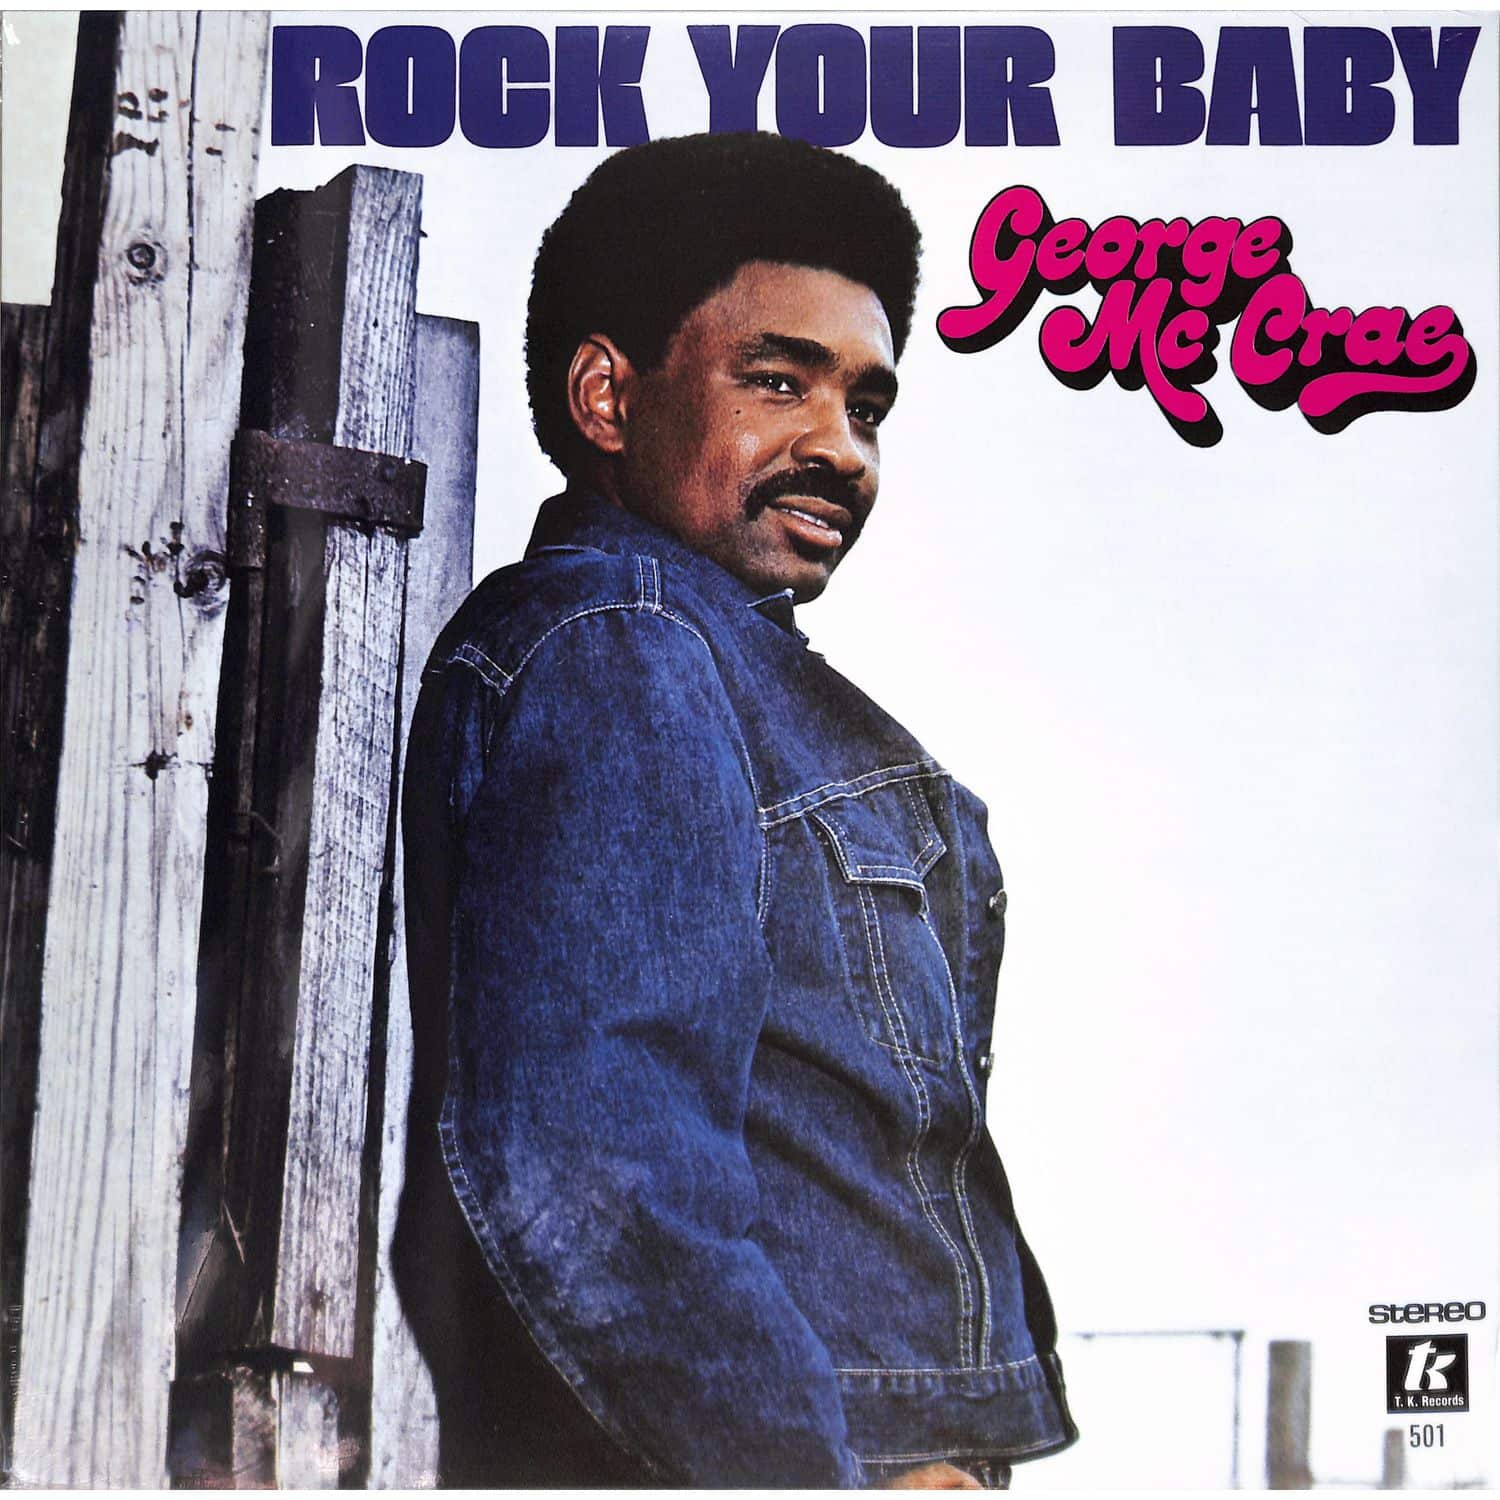 George McCrae - ROCK YOUR BABY 